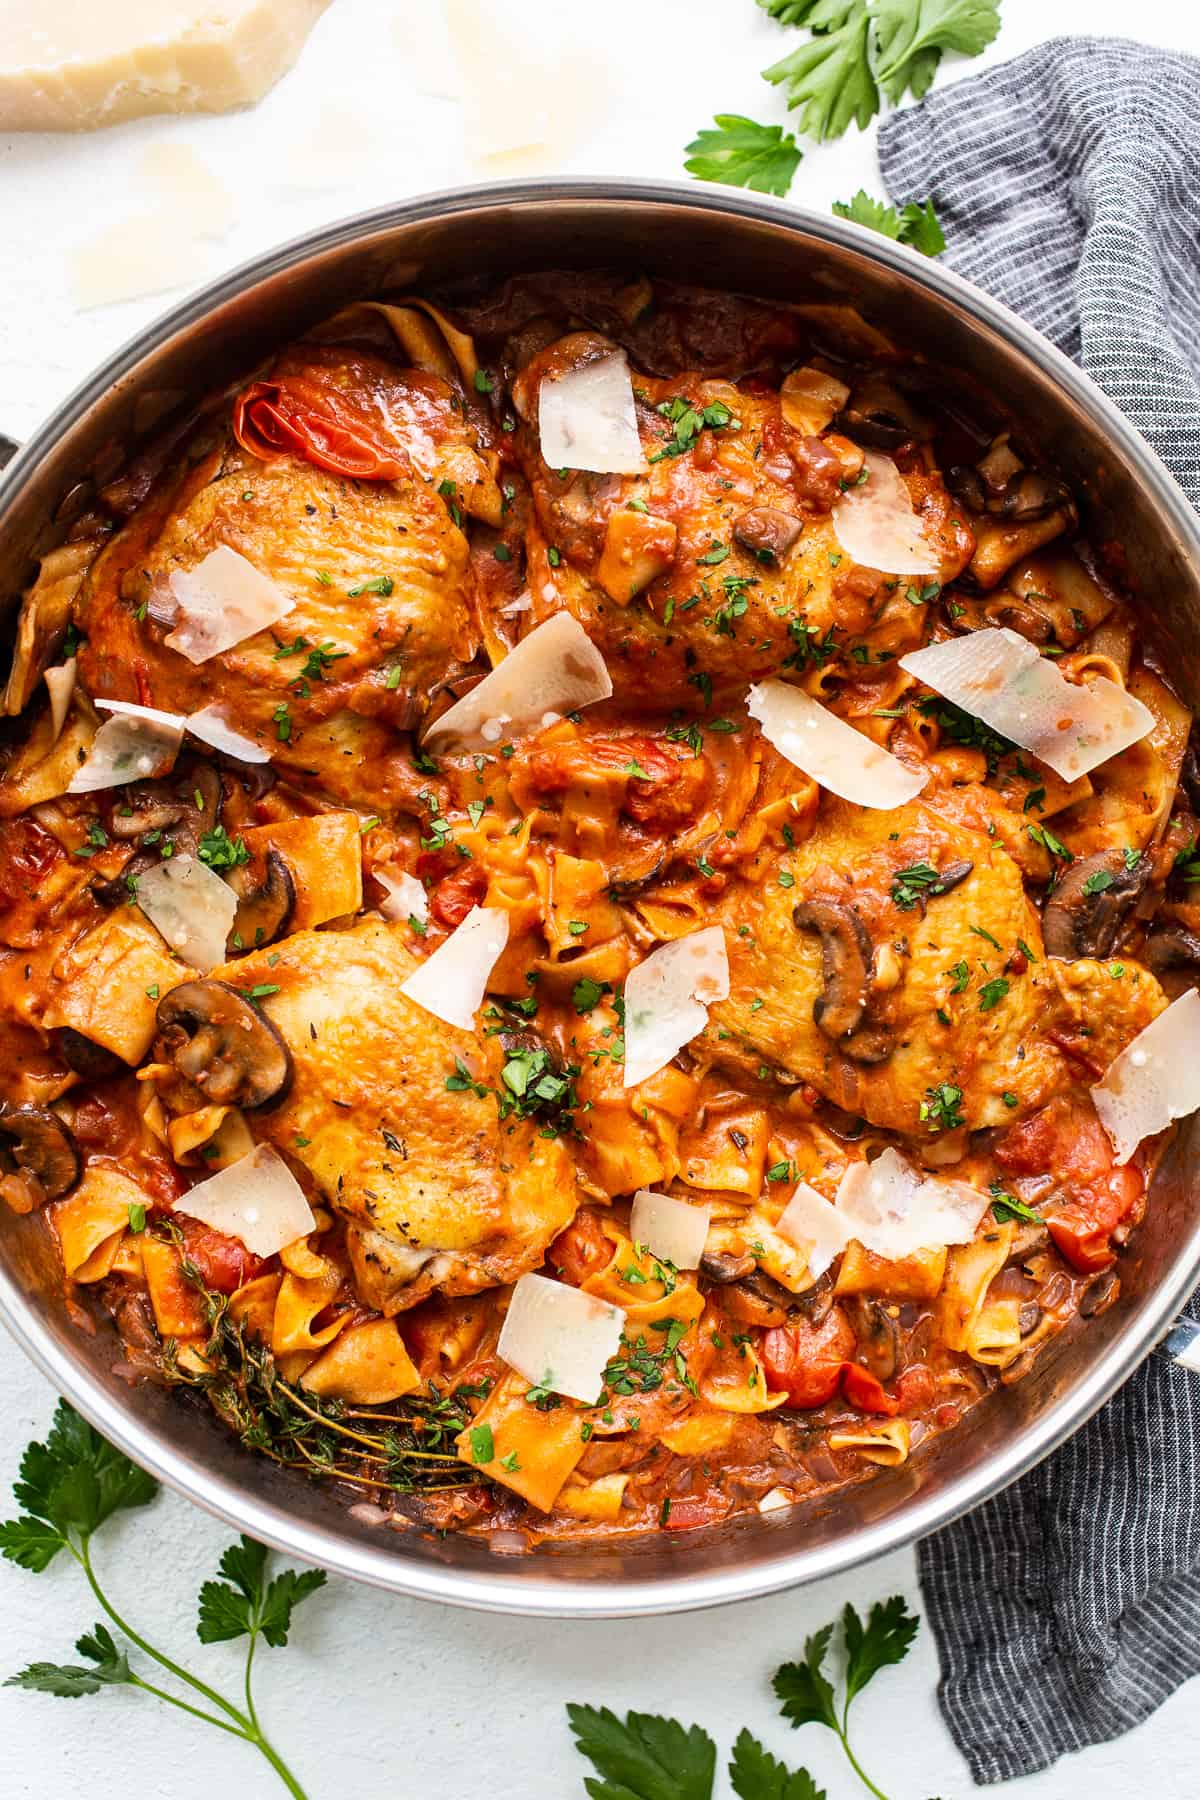 Pappardelle pasta with chicken thighs in a pot.